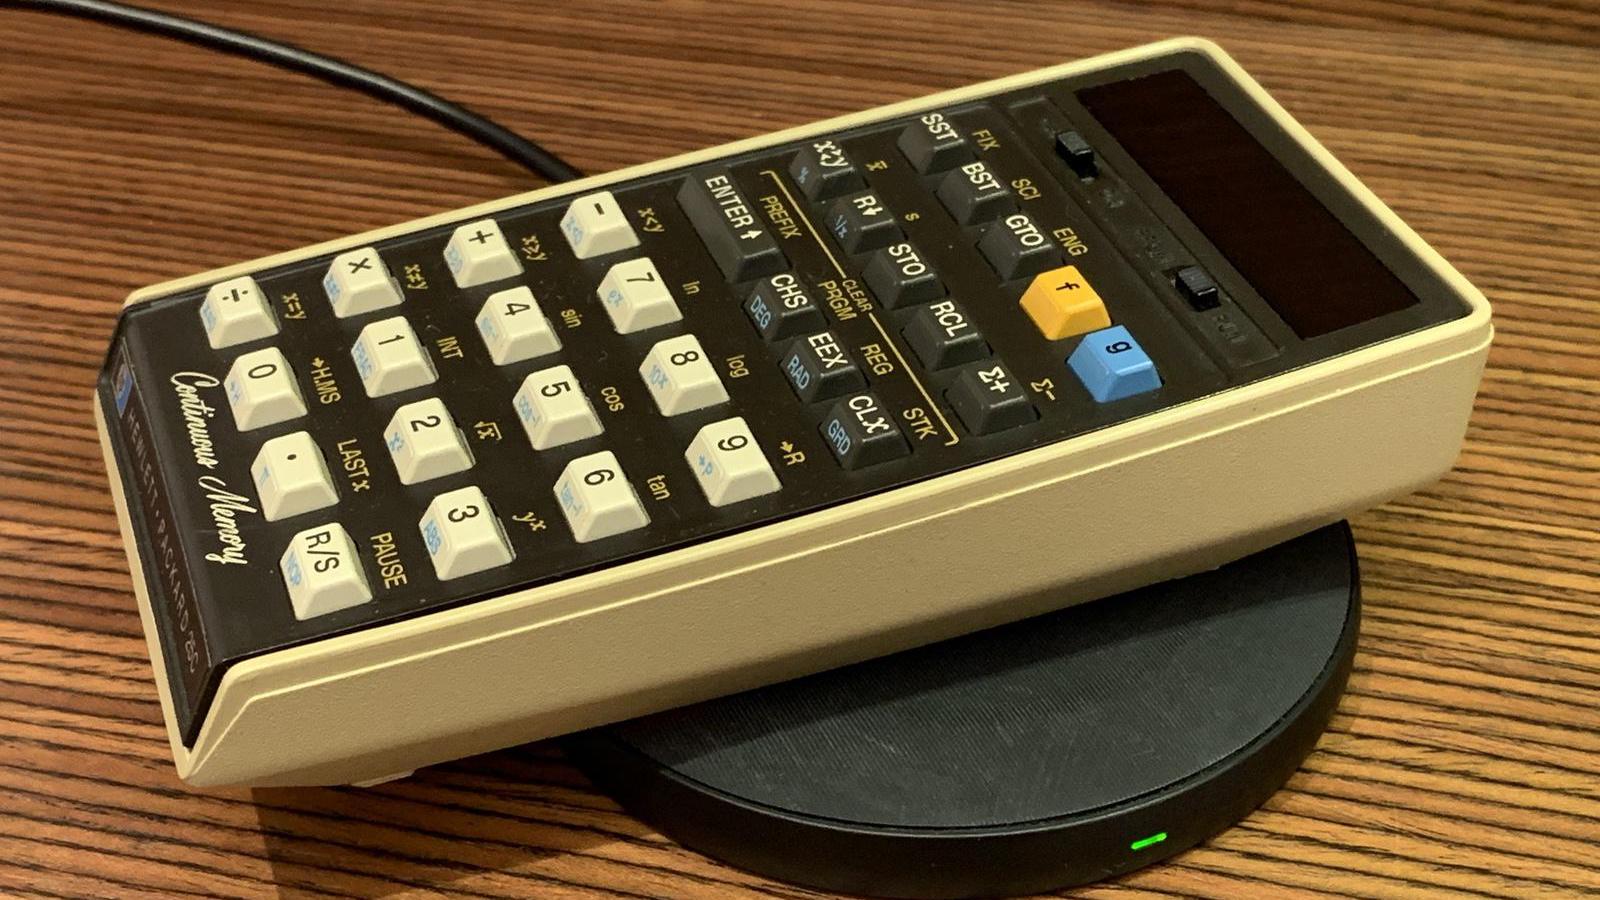 [Jan Rychter] really likes his multiple HP-25C calculators, but the original battery pack design is crude and outdated. No problem — he whips up